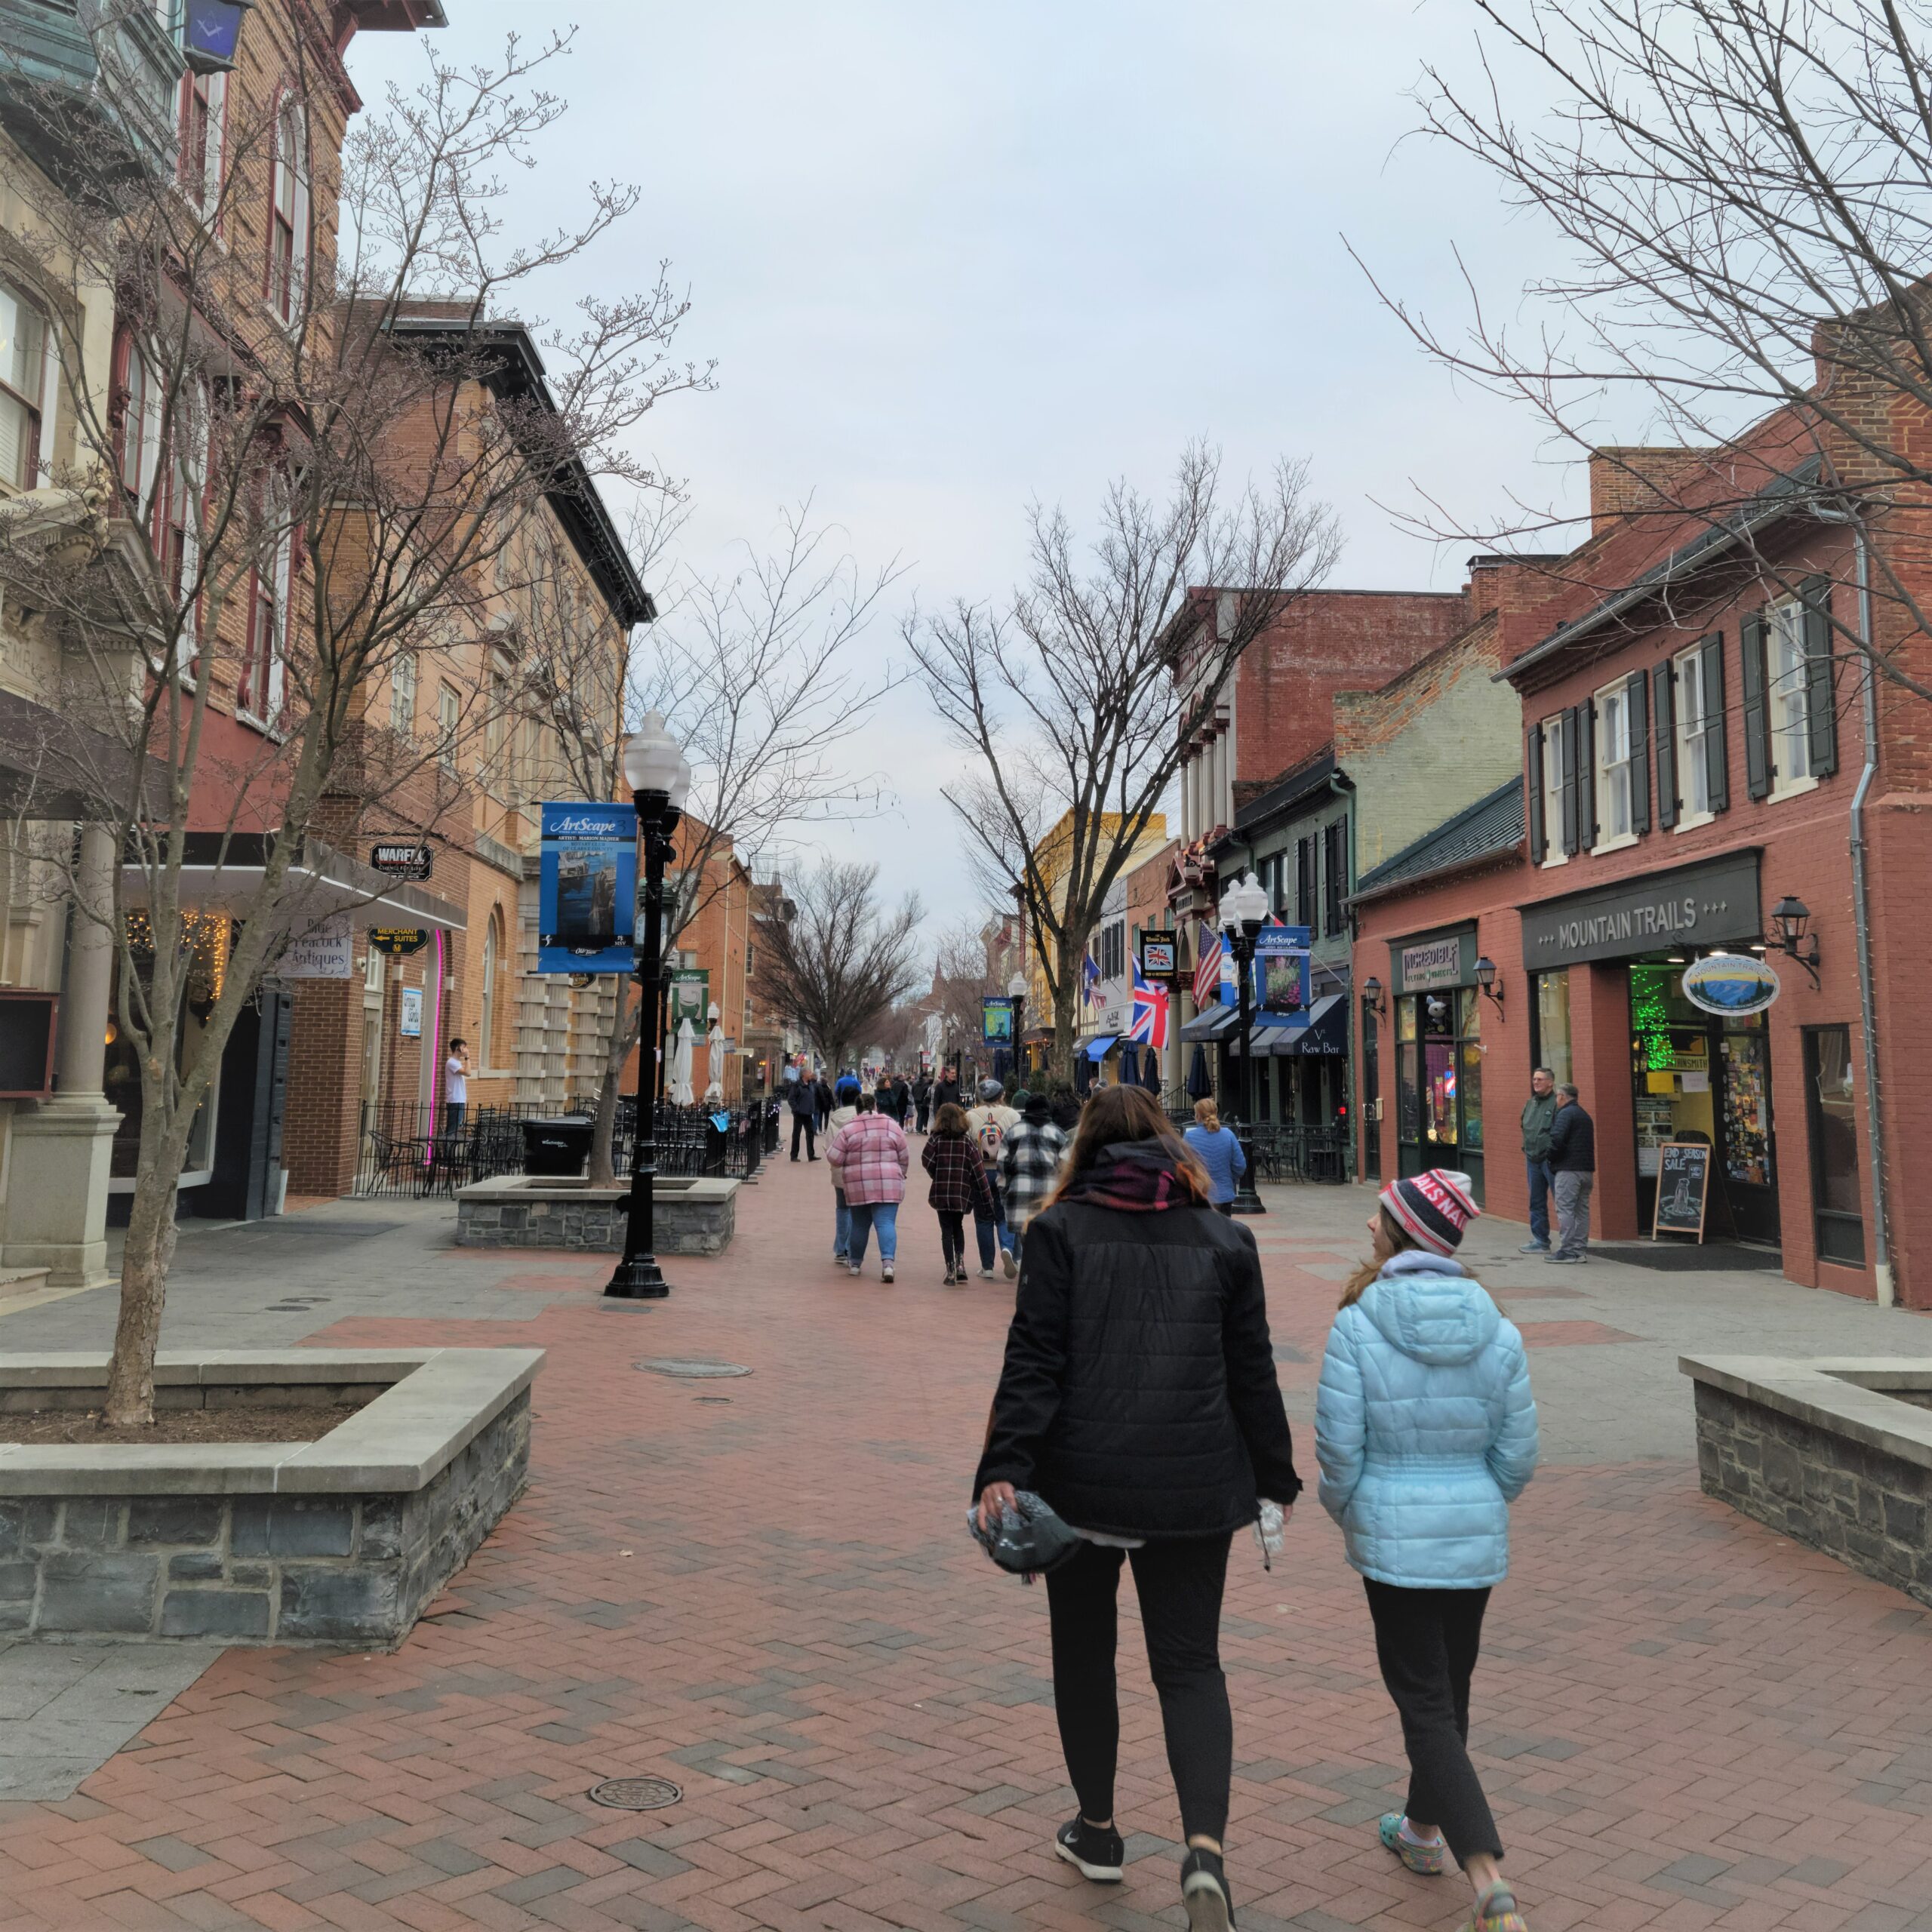 A photo of a woman and daughter dressed warm, walking away from the camera on a downtown pedestrian mall lined with bricks and historic buildings.